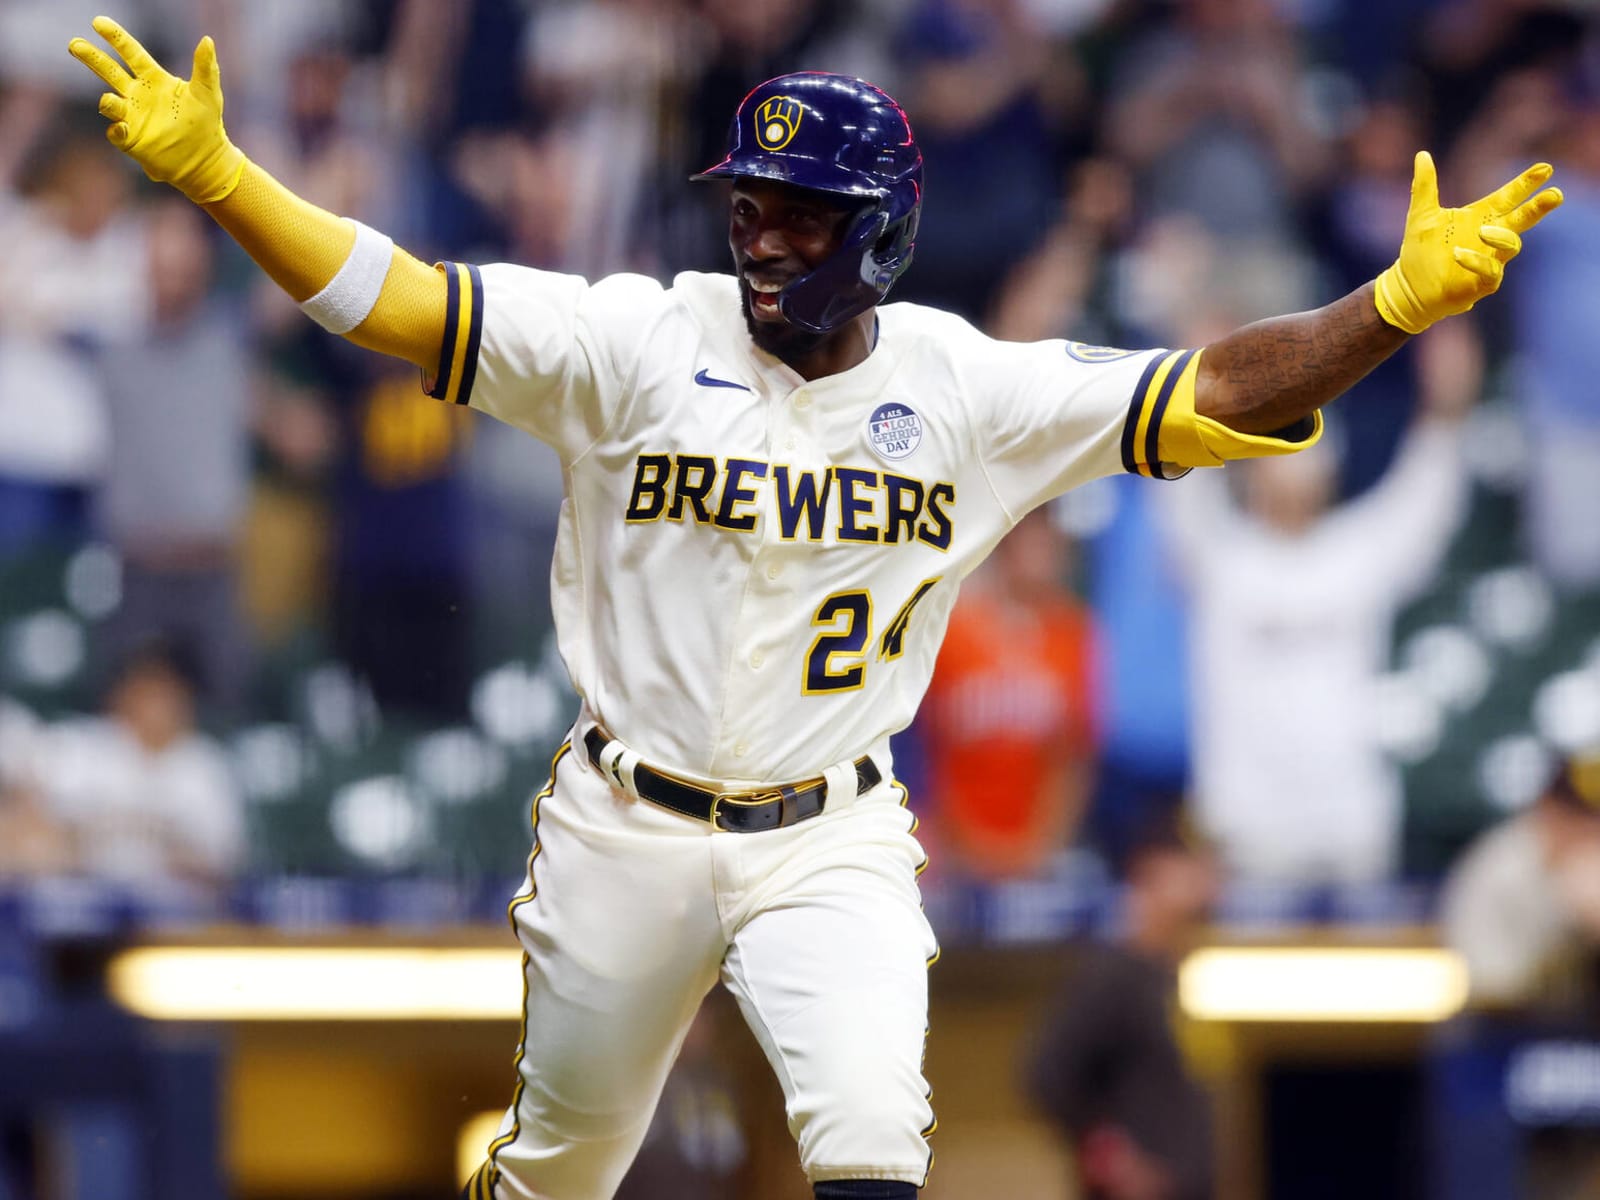 McCutchen reveals why he chose to play for Brewers